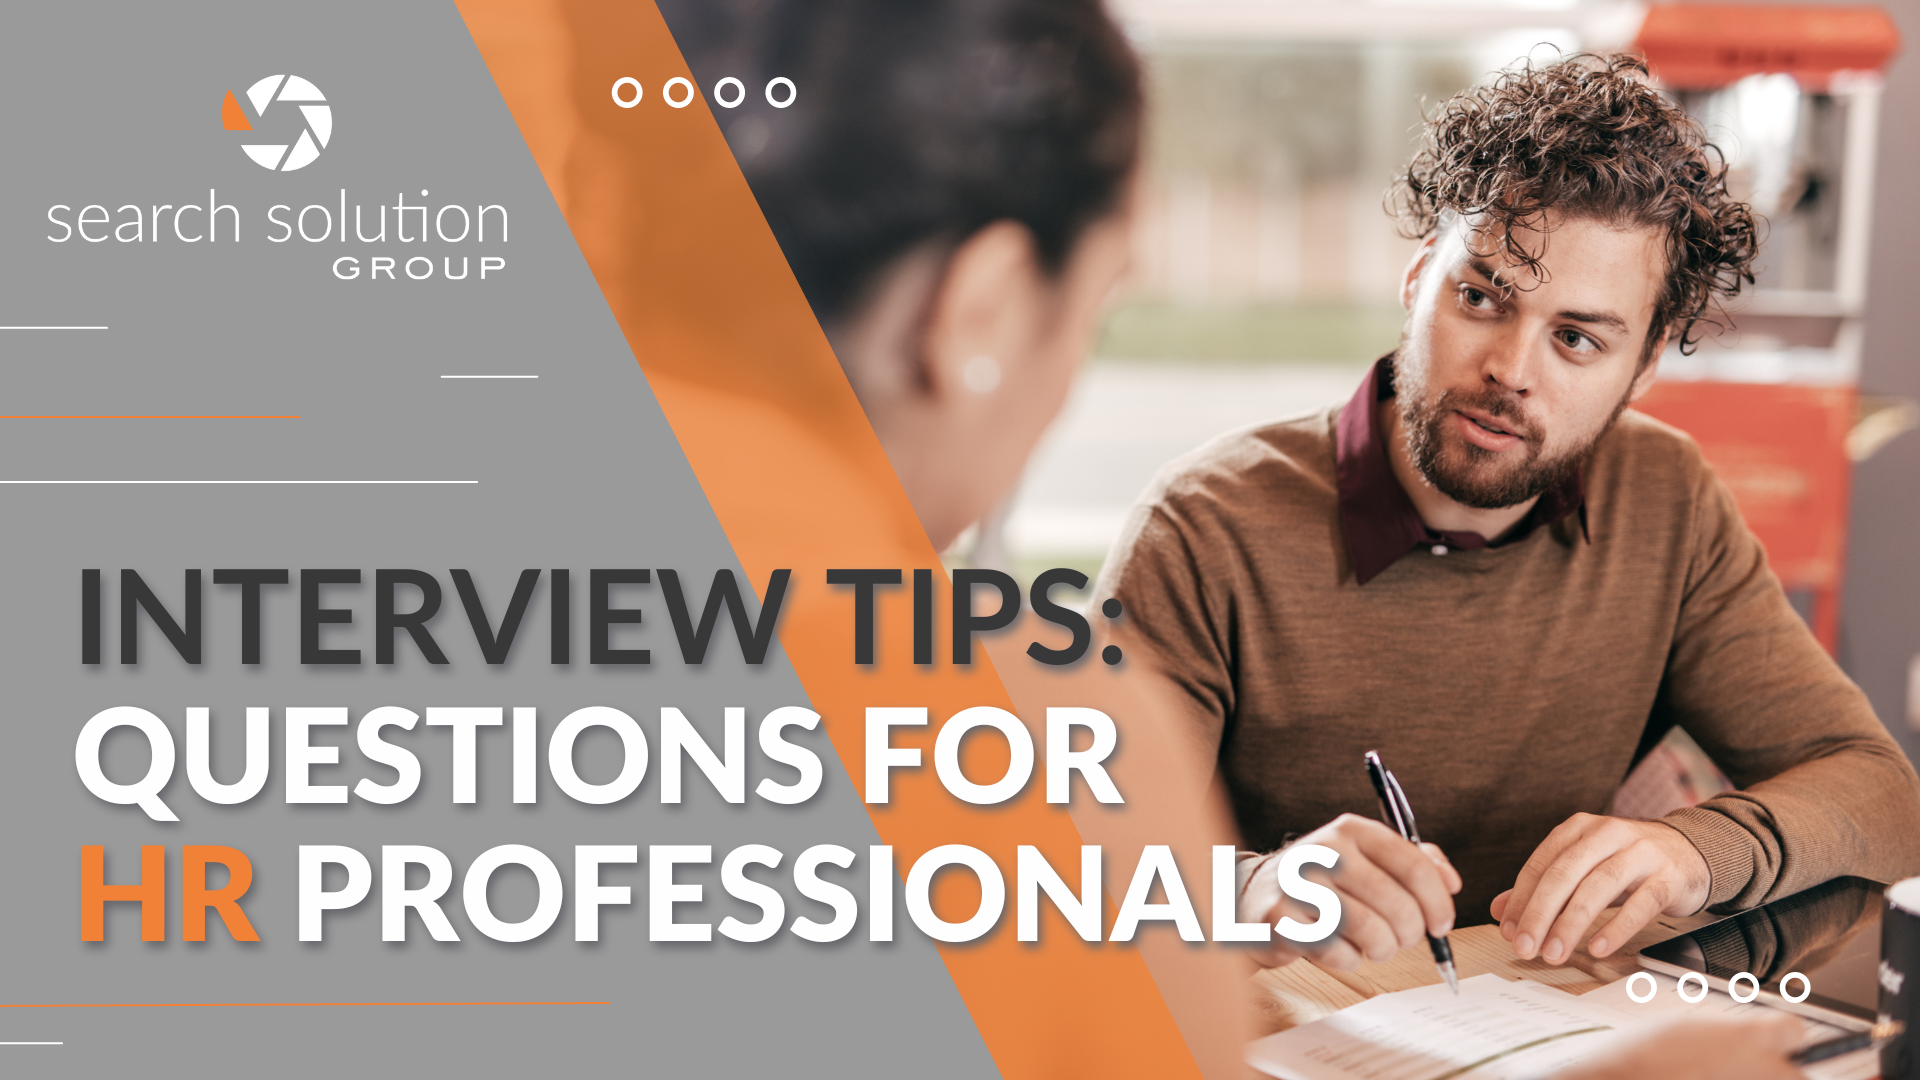 Interview Tips: 12 “Must-Ask” Questions to Ask HR Professionals